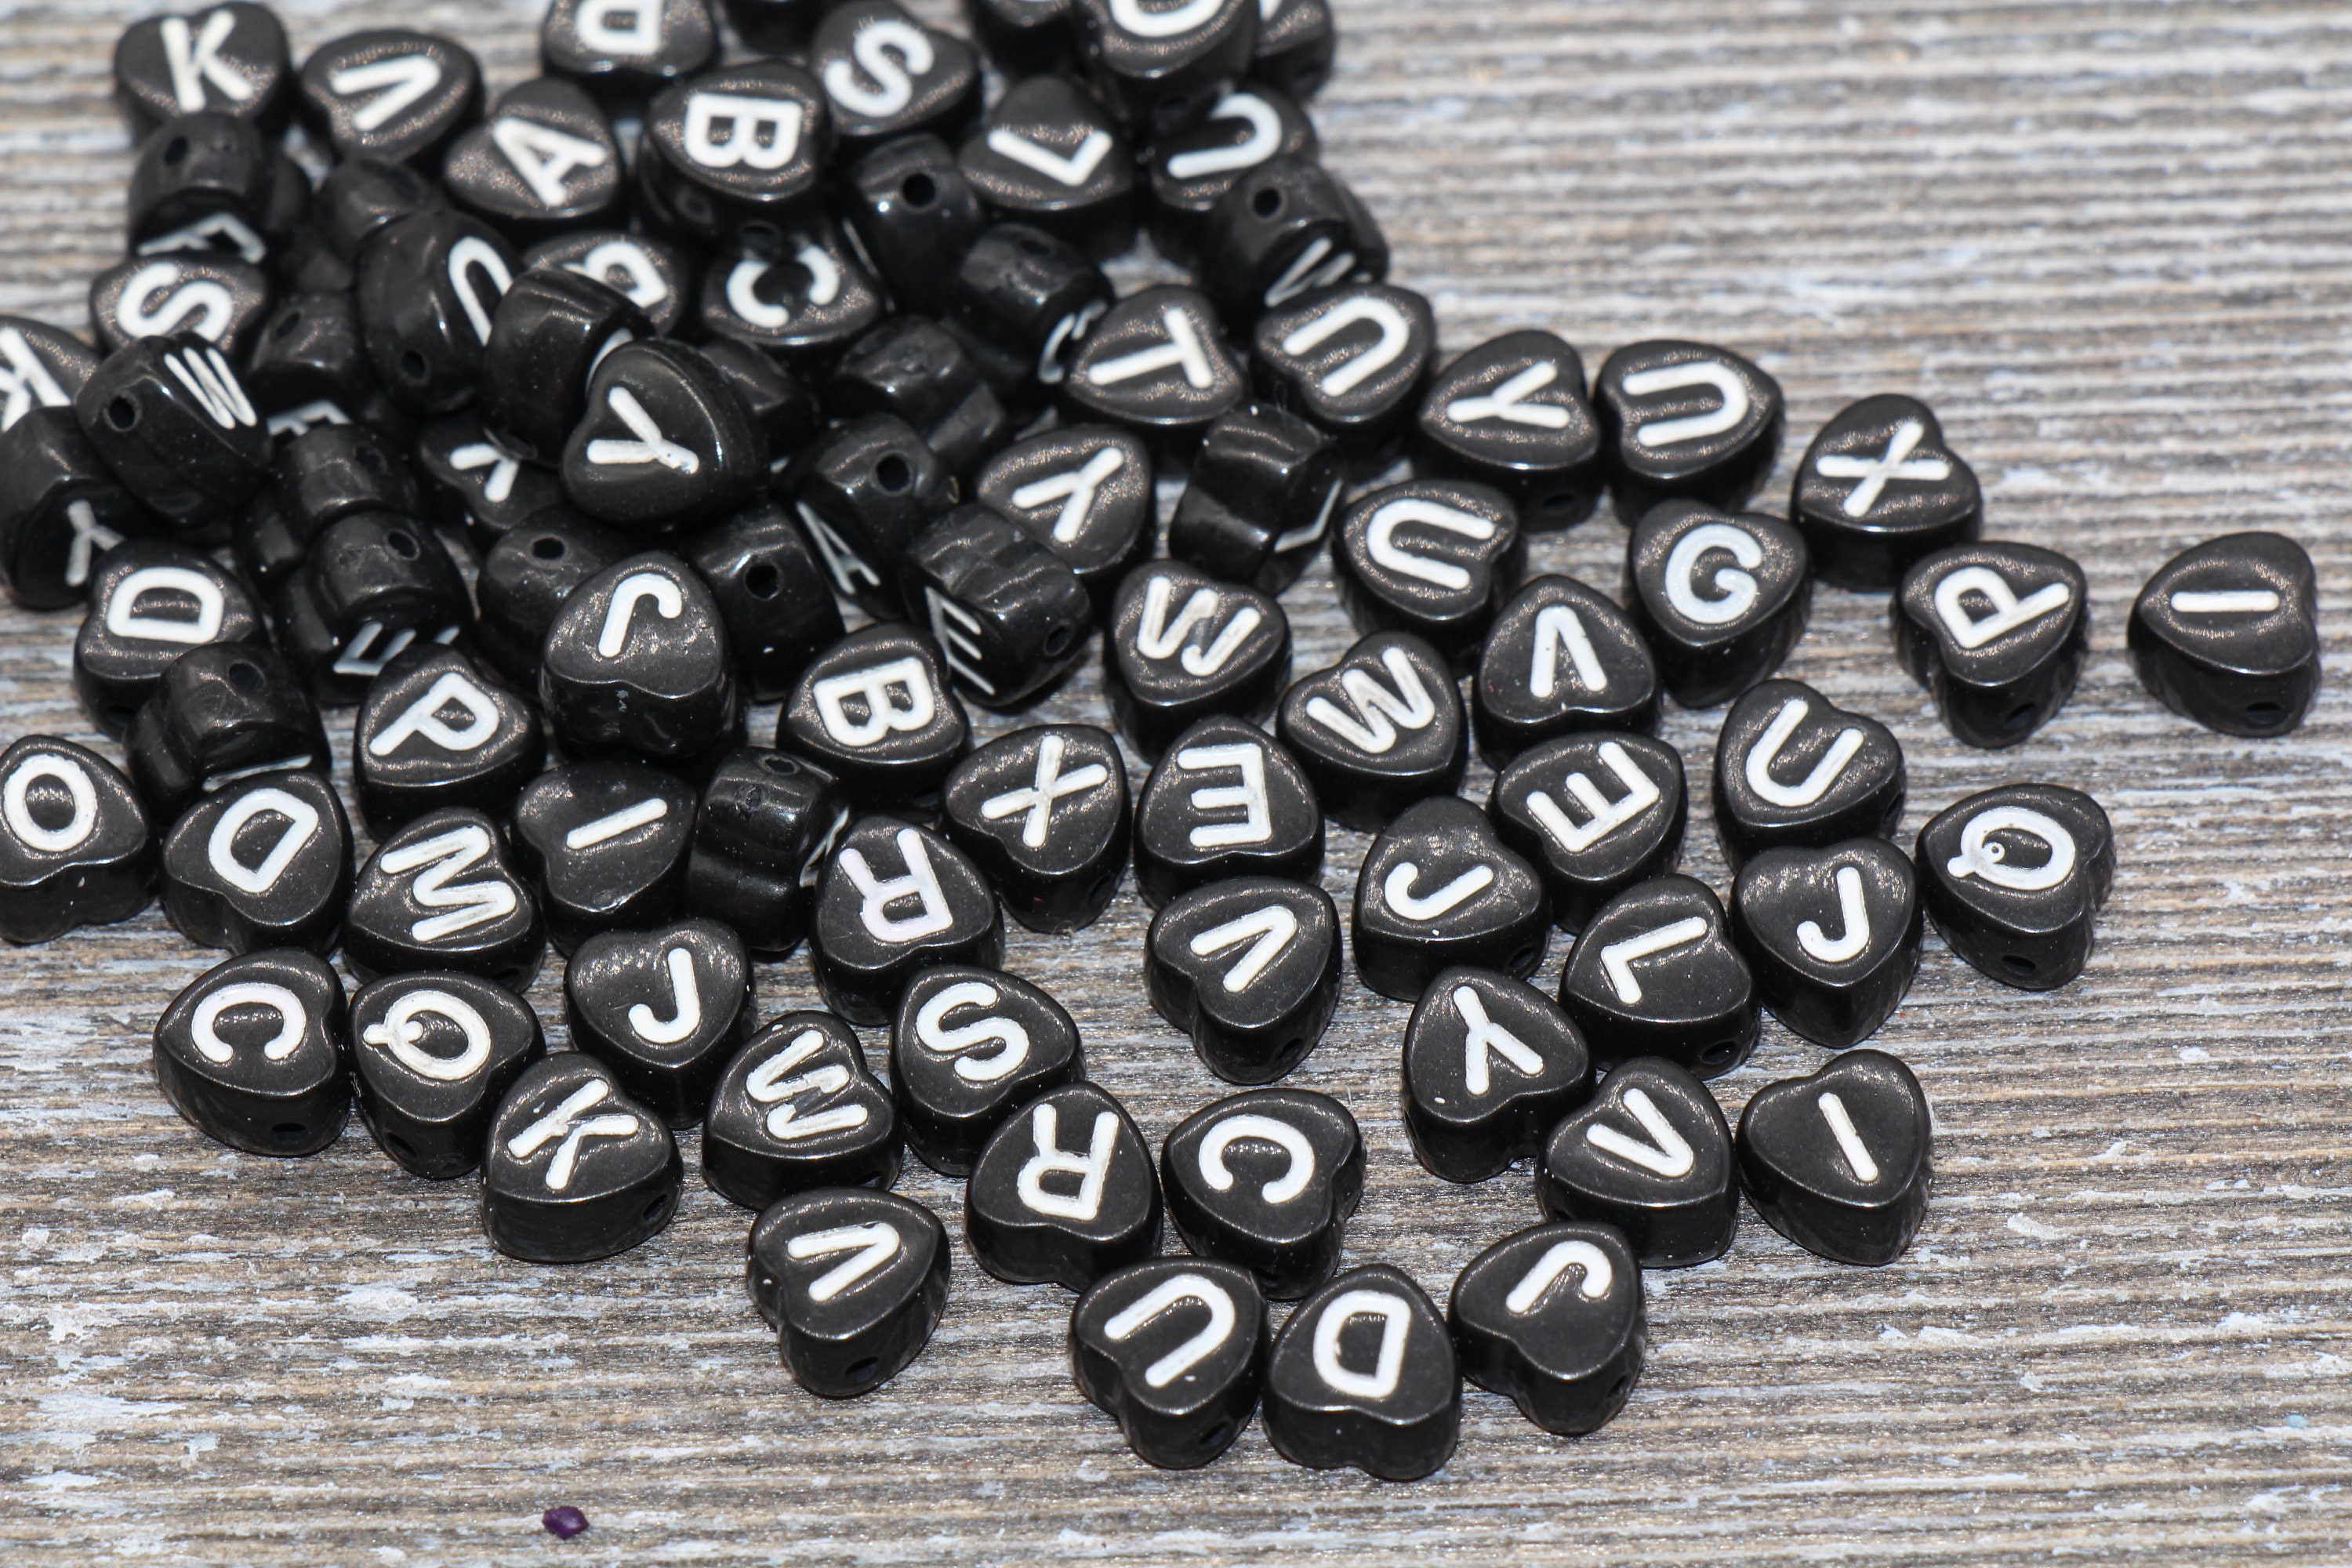  Black And White Beads